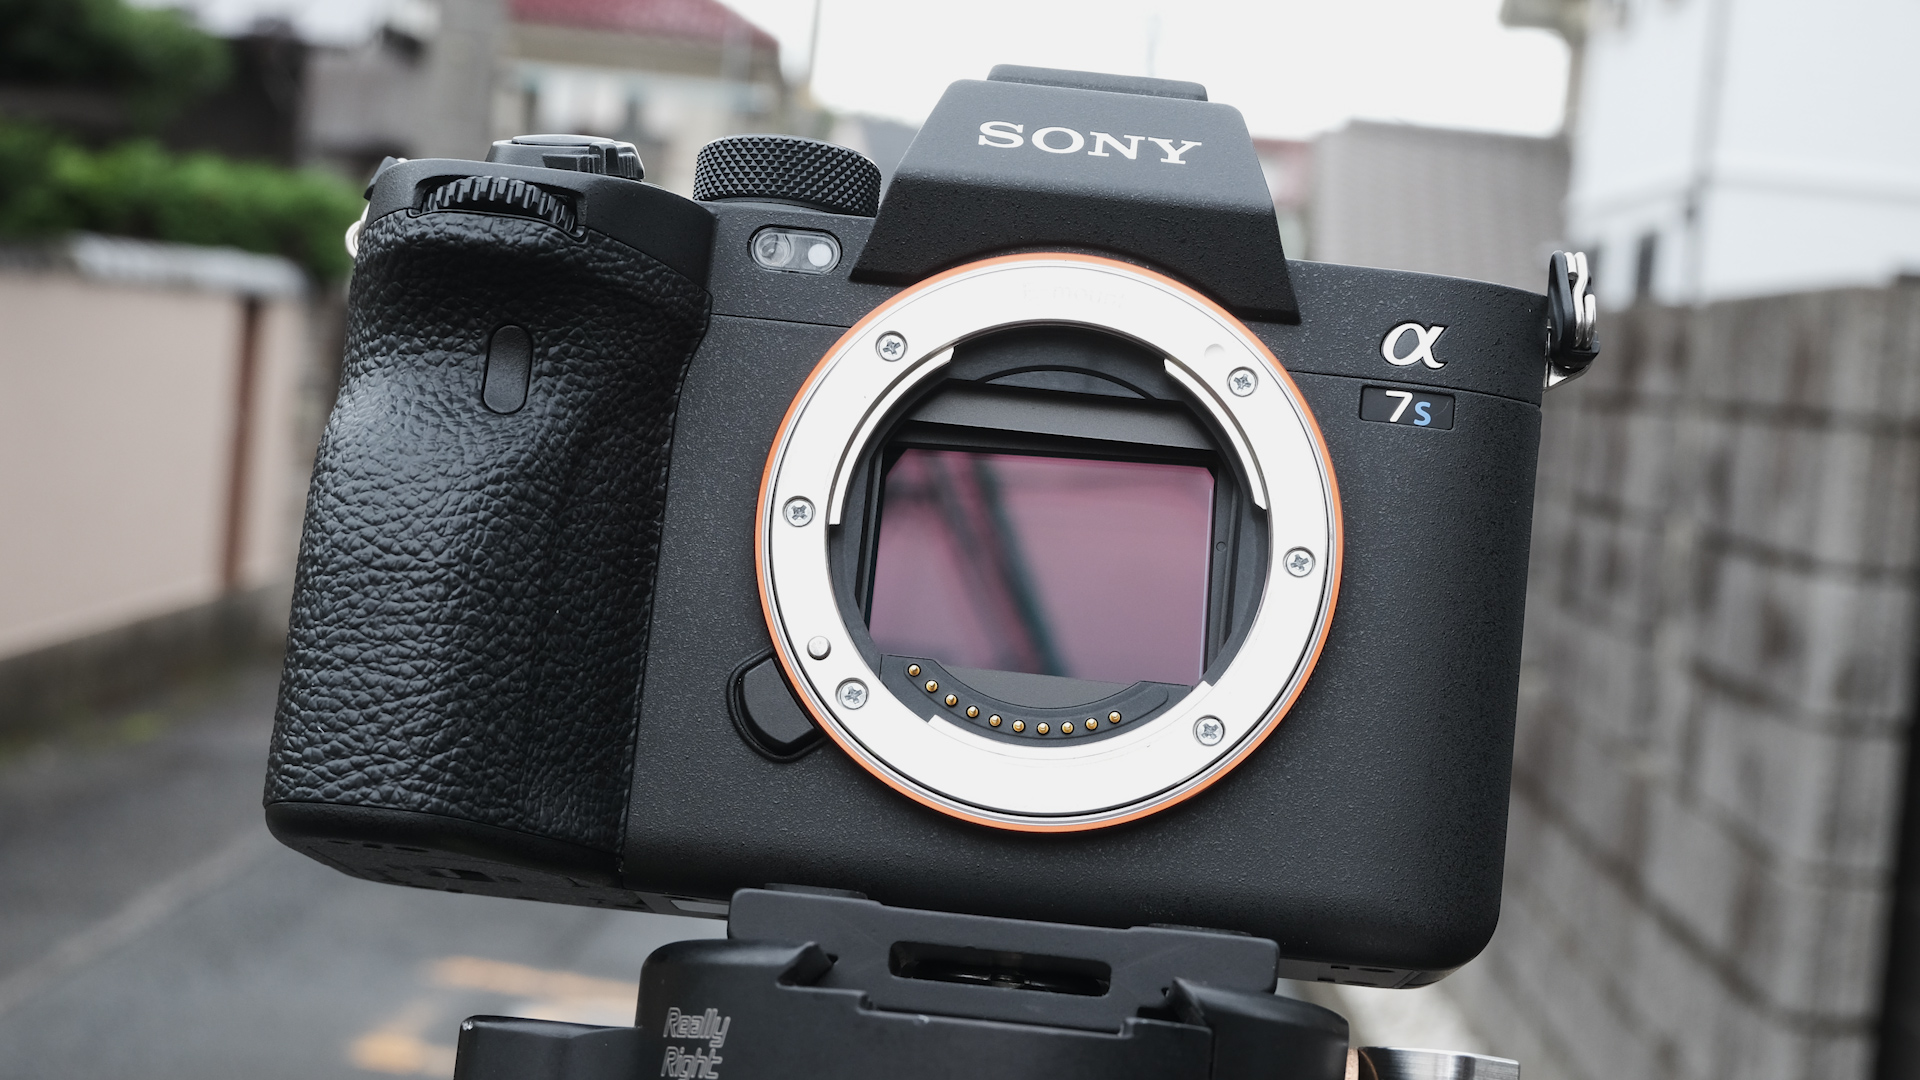 Sony a7S III Review - Mini Documentary and Lowlight Sample Footage